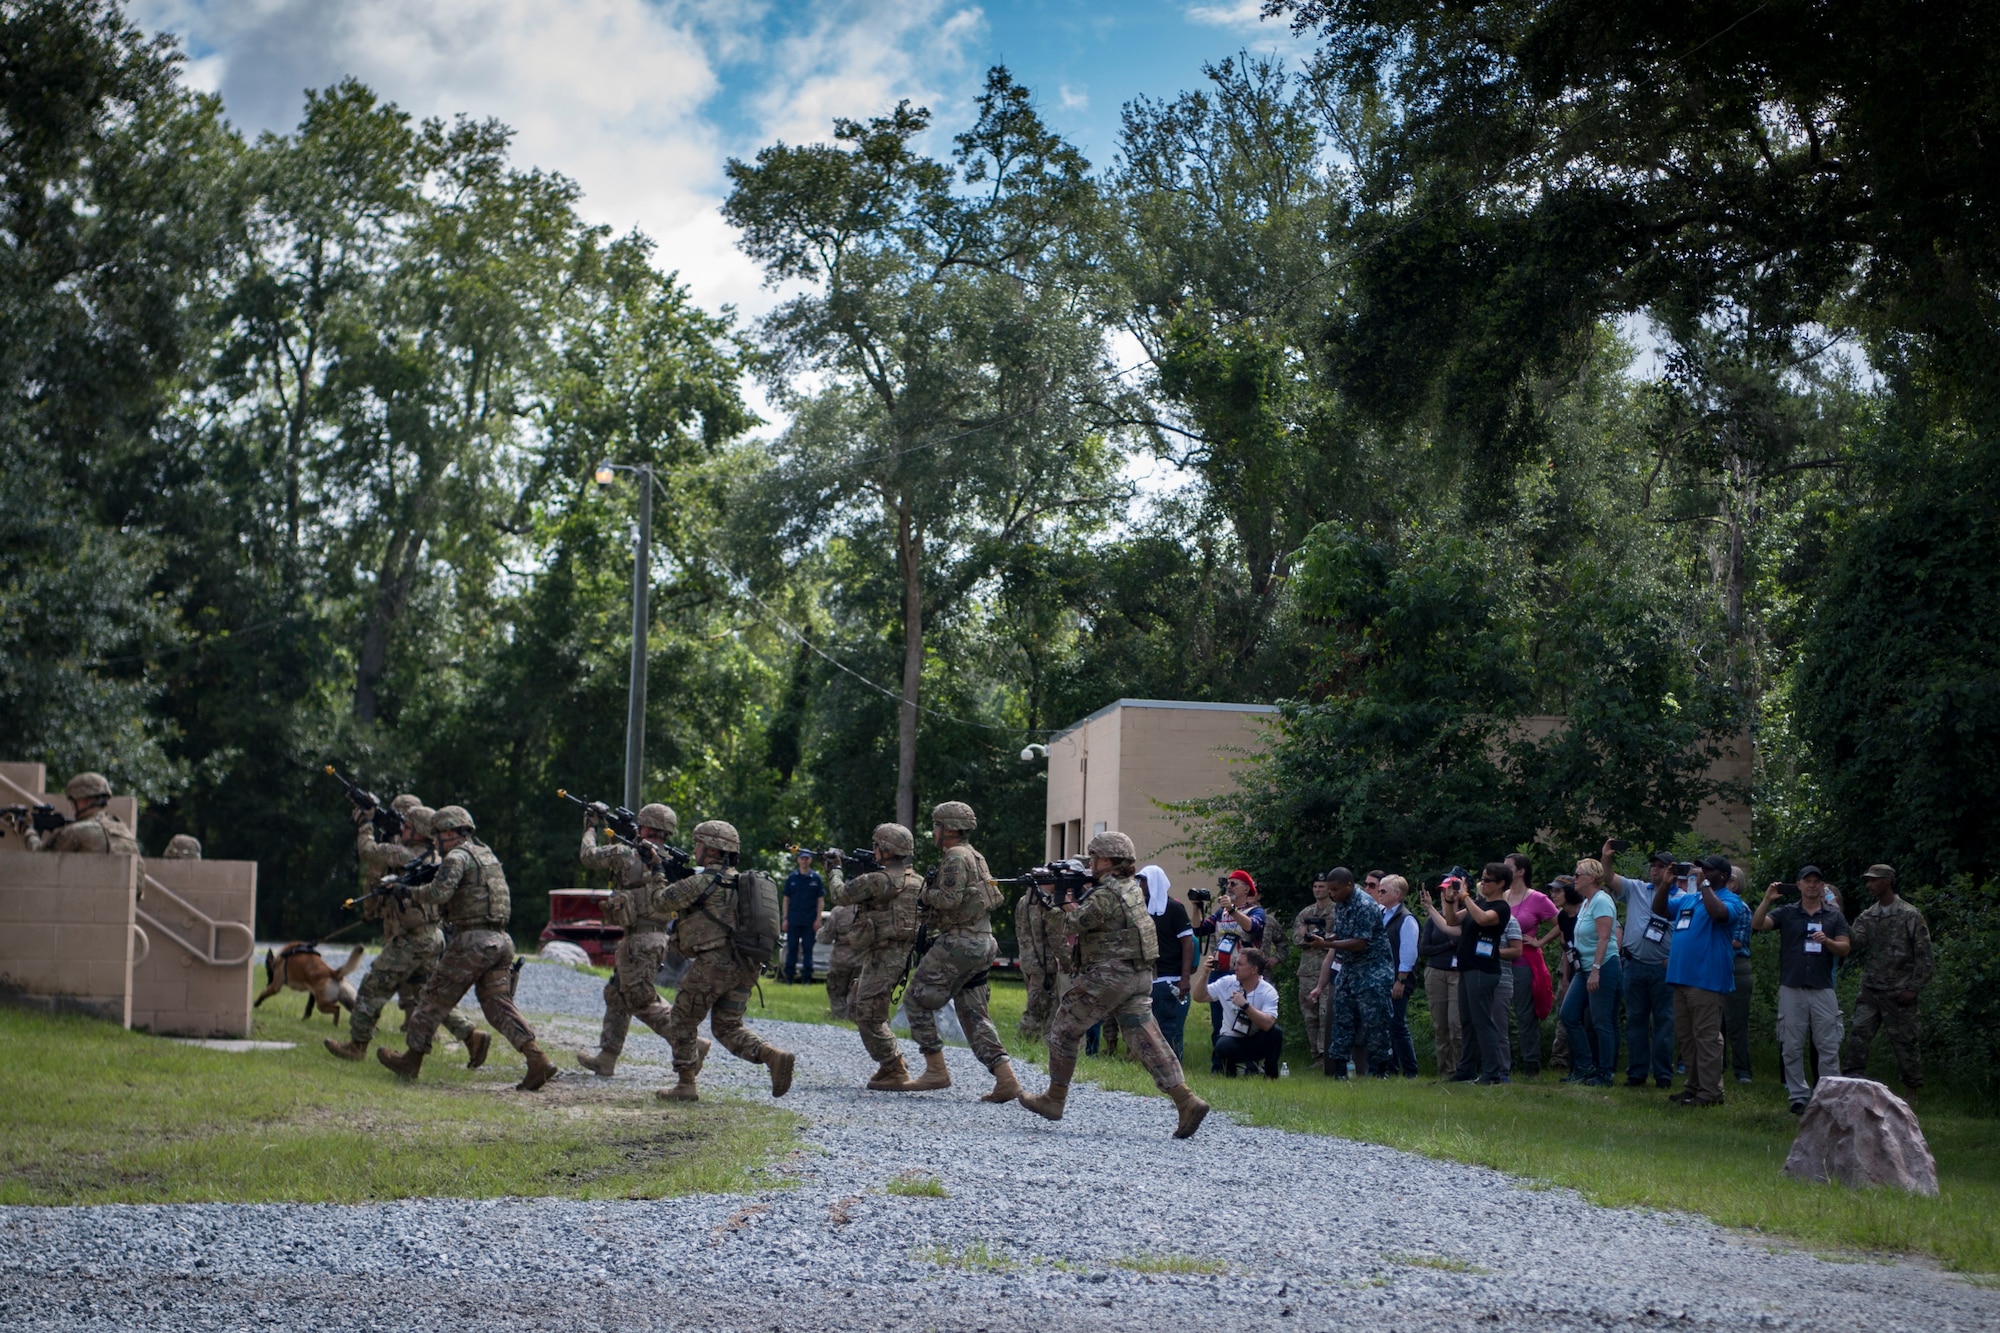 Members of the Joint Civilian Orientation Course 88 (JCOC) watch as Airmen from the 820th Base Defense Group conduct a capabilities demonstration, June 13, 2018, at Moody Air Force Base, Ga. The mission of JCOC is to increase the public’s understanding of the military through engagements between the armed forces and course members. (U.S. Air Force photo by Senior Airman Daniel Snider)